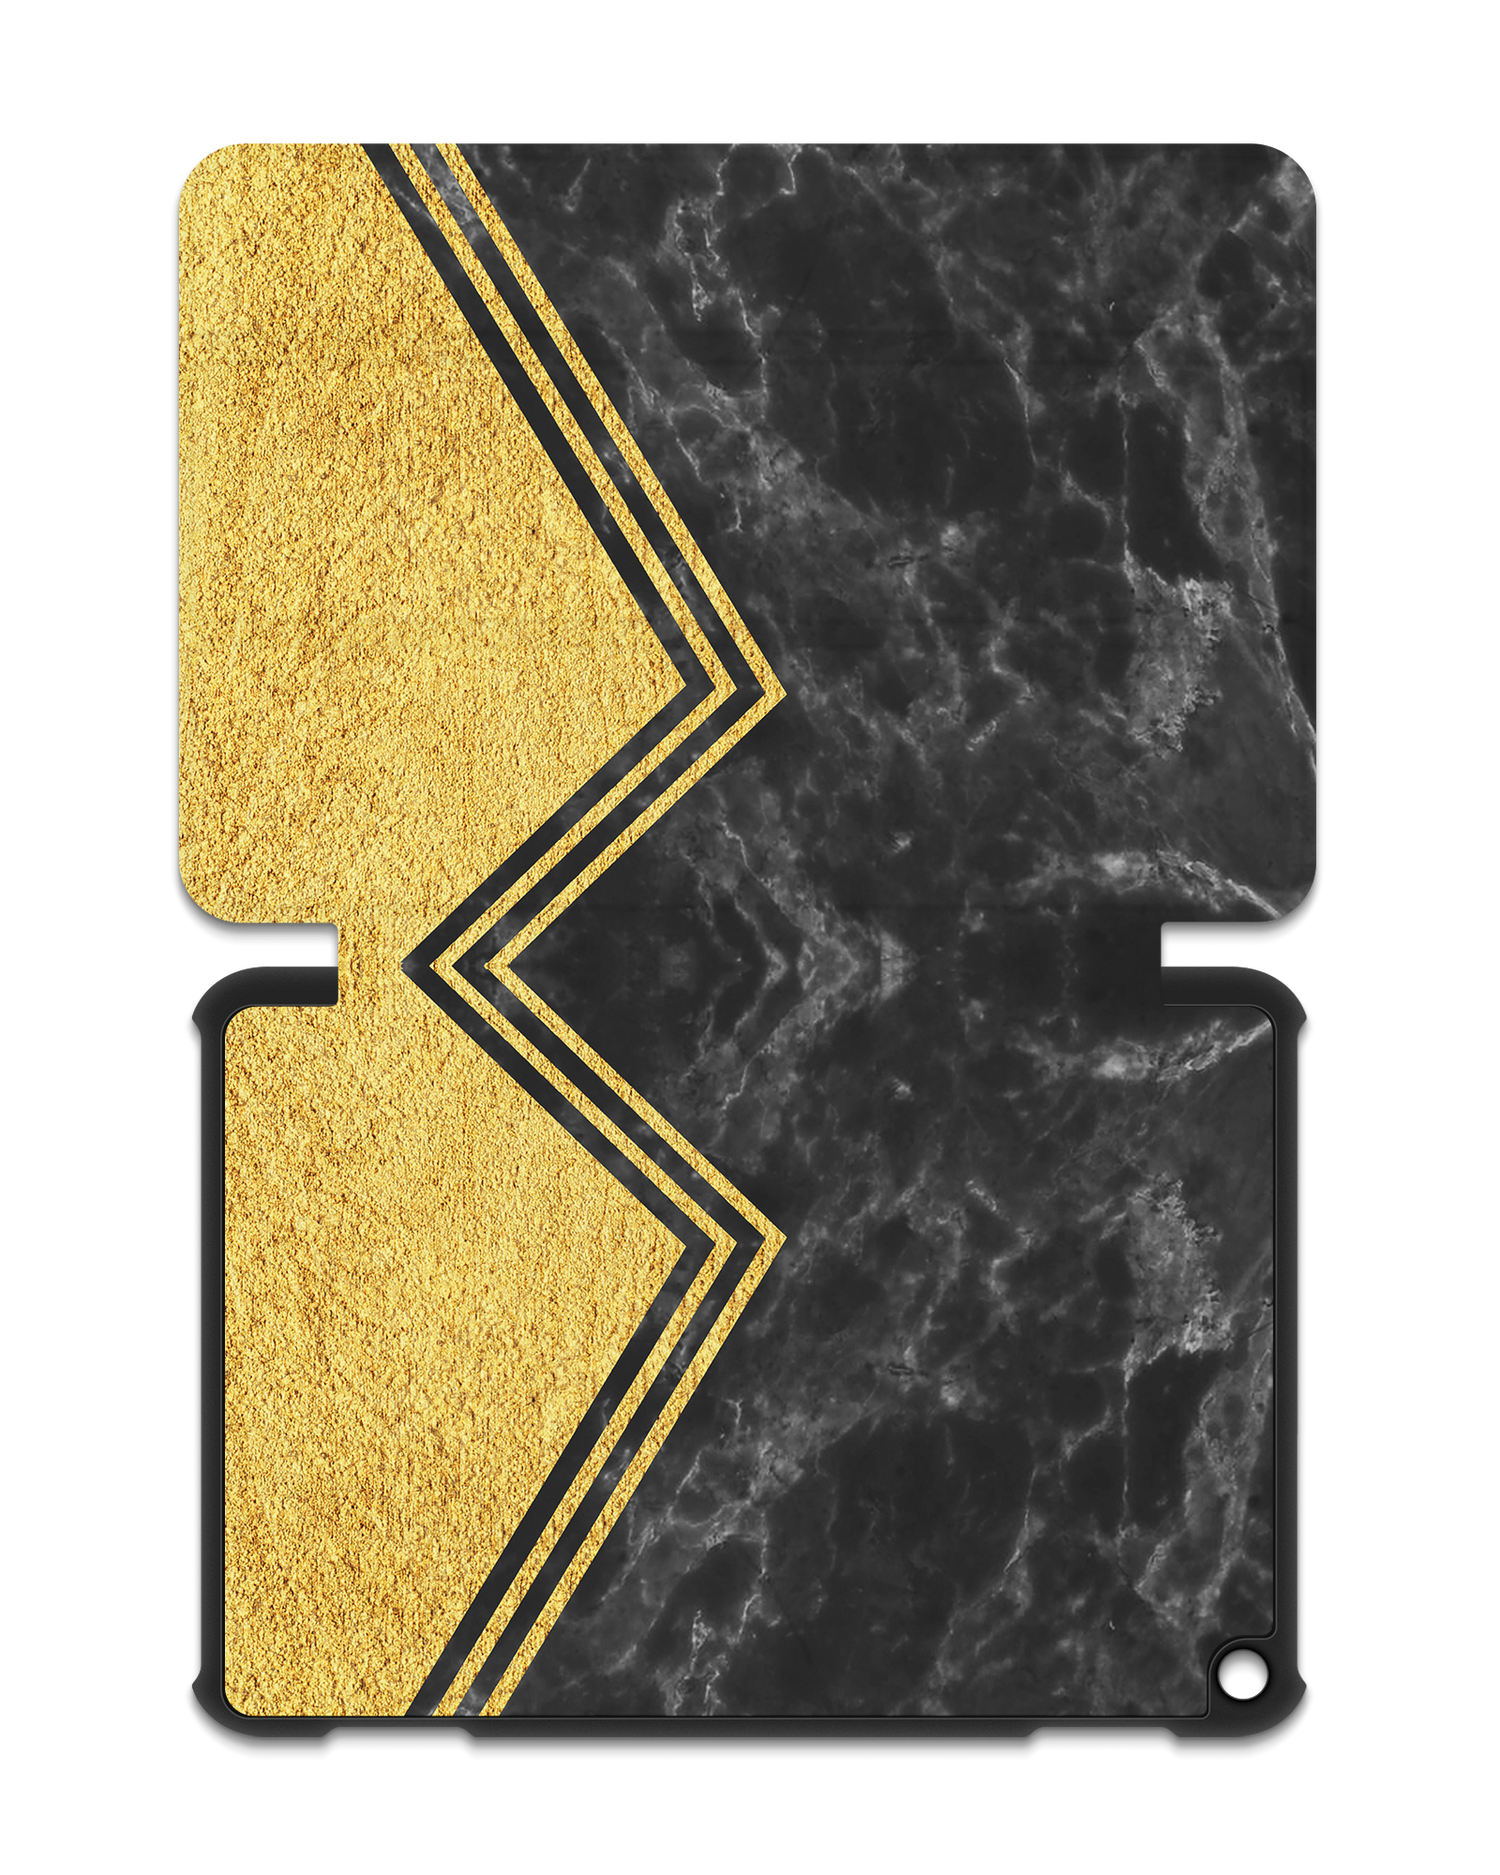 Gold Marble Tablet Smart Case for Amazon Fire HD 8 (2022), Amazon Fire HD 8 Plus (2022), Amazon Fire HD 8 (2020), Amazon Fire HD 8 Plus (2020): Opened